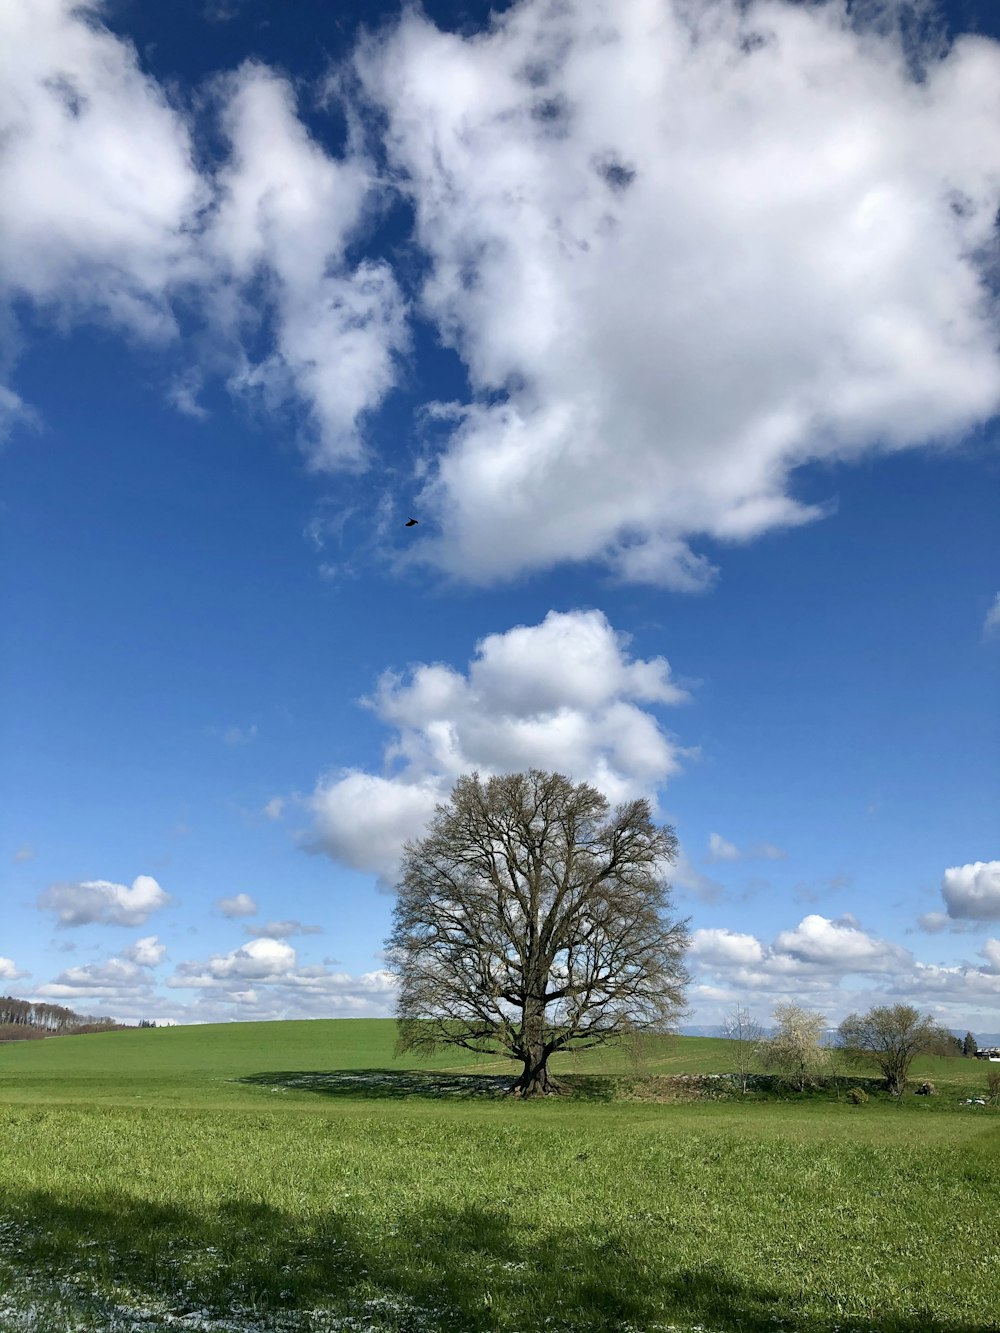 leafless tree on green grass field under blue and white cloudy sky during daytime